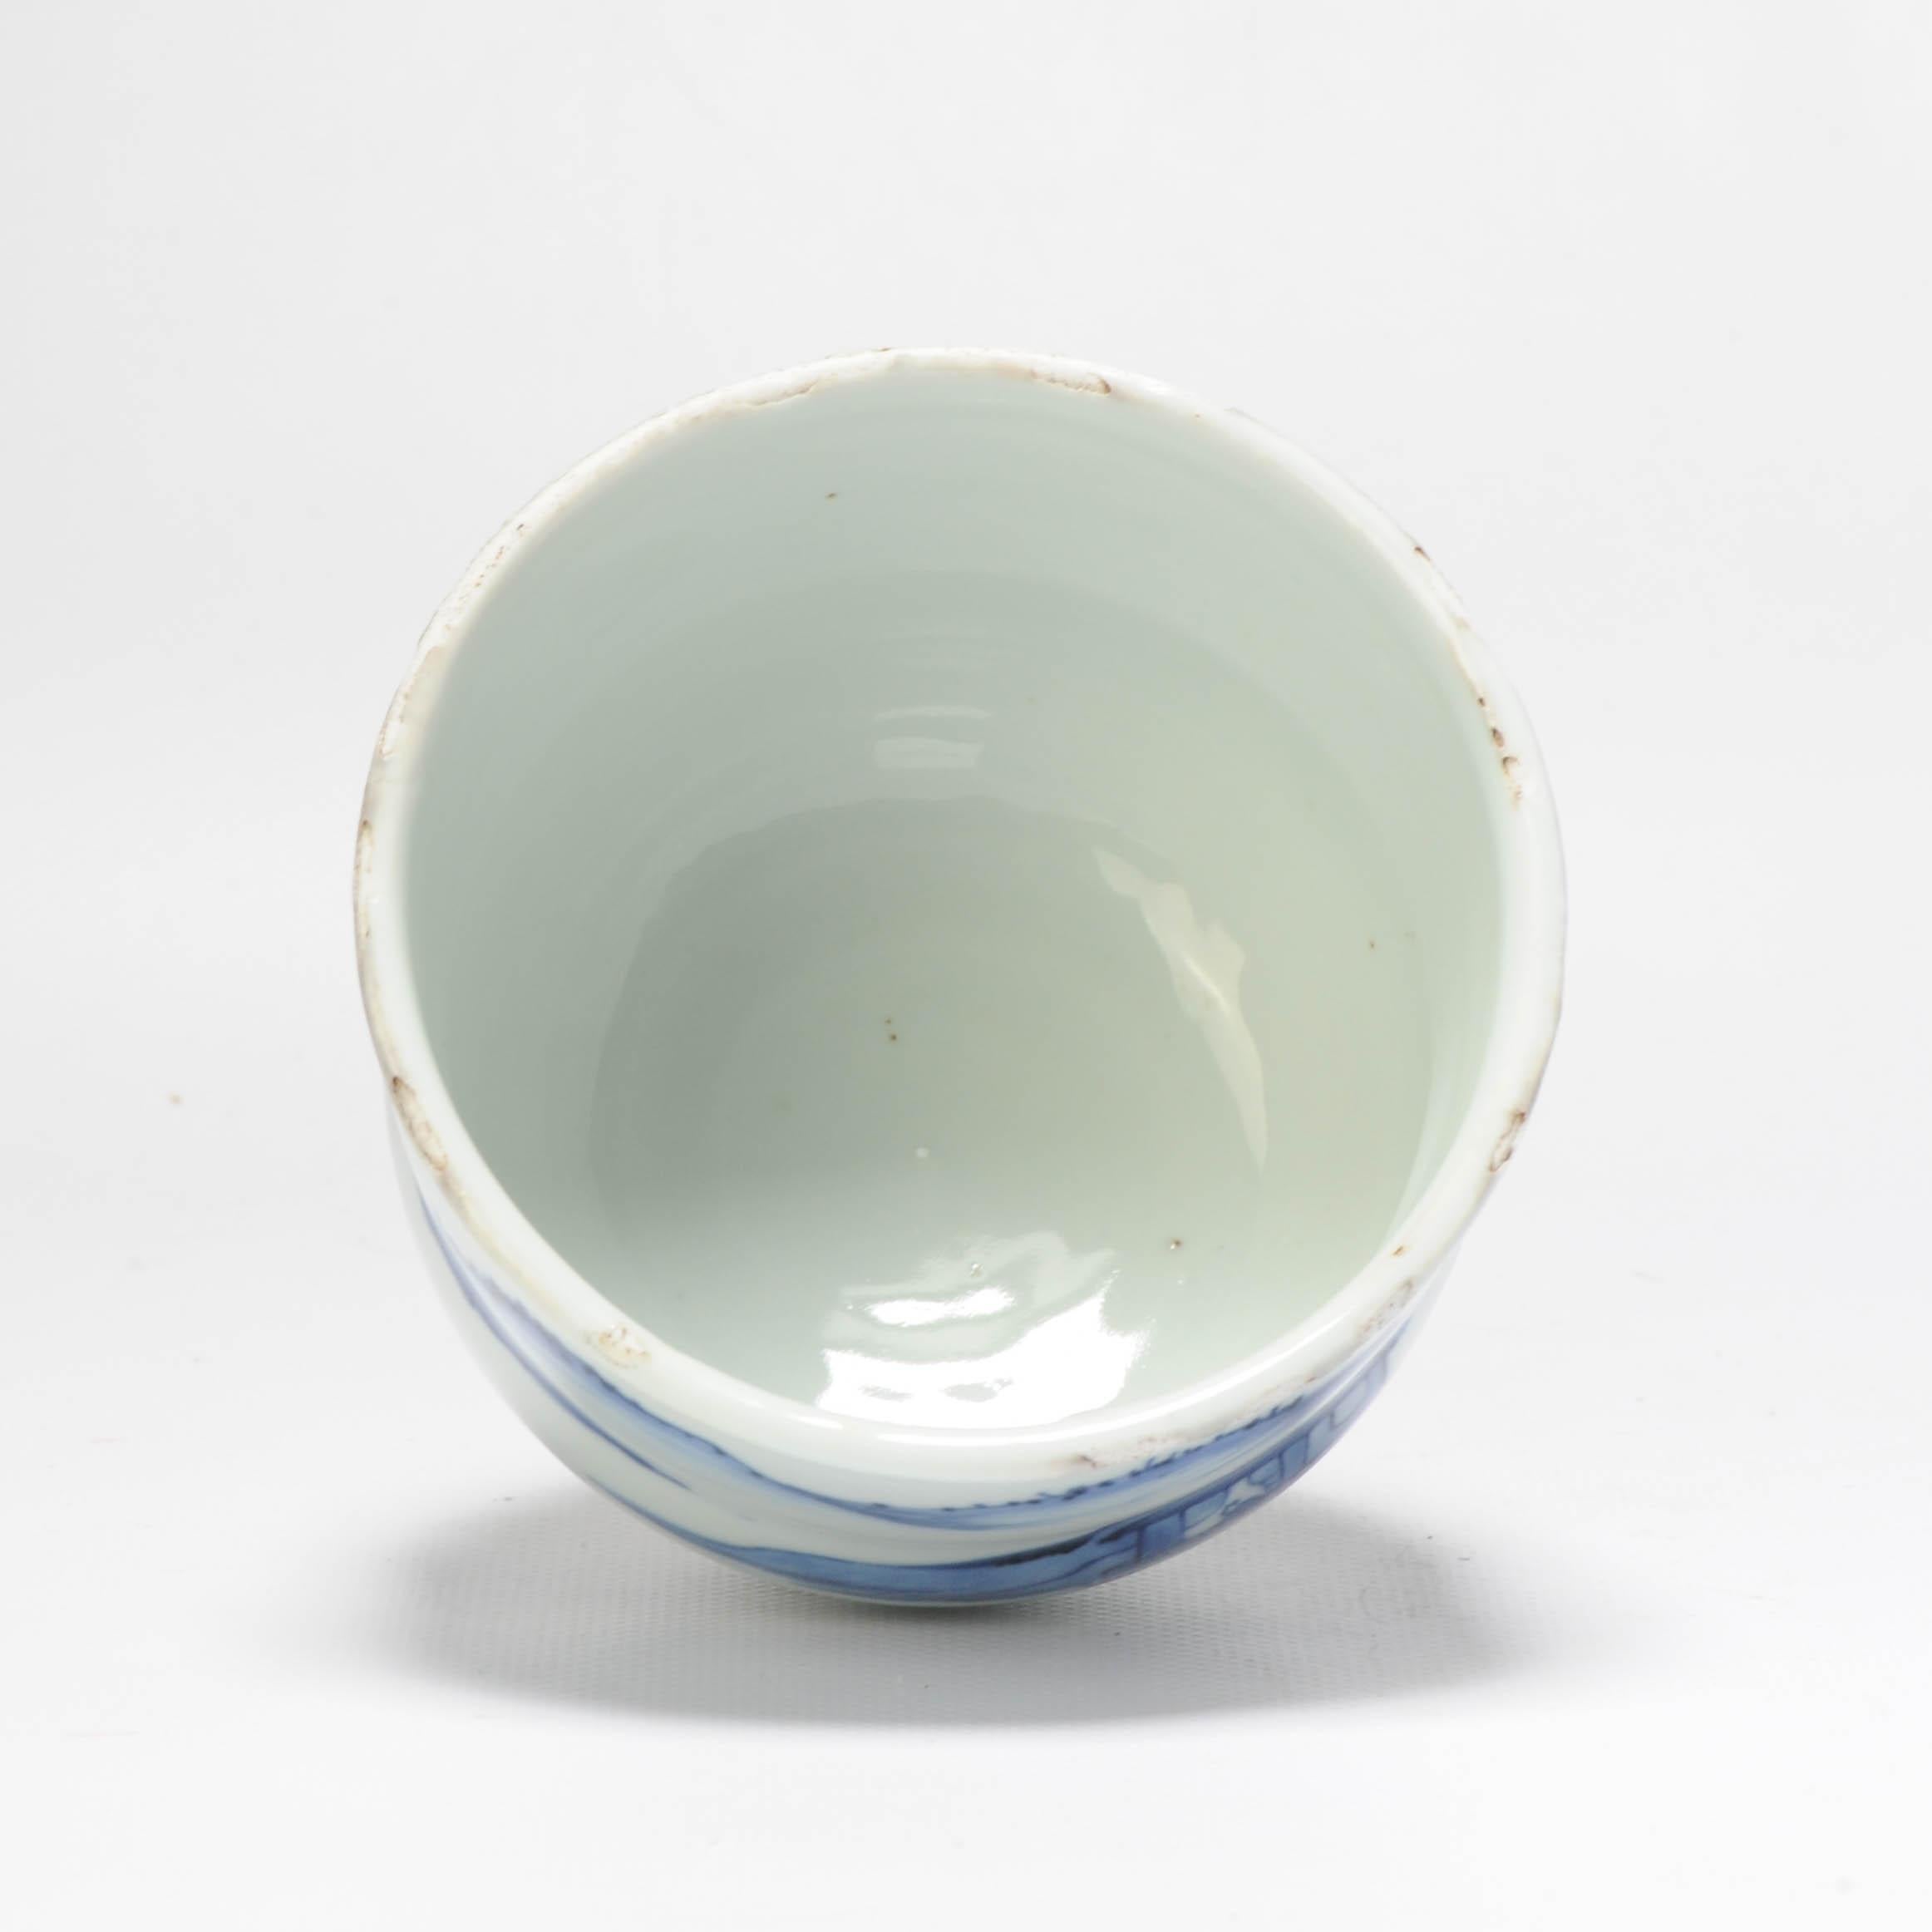 A very nice water pot/jar for the Japanese market, Late Ming dynasty Kosometsuke.

With matching storage box.

Additional information:
Material: Porcelain & Pottery
Color: Blue & White
Region of Origin: China
Period: 17th century Ming & Transitional